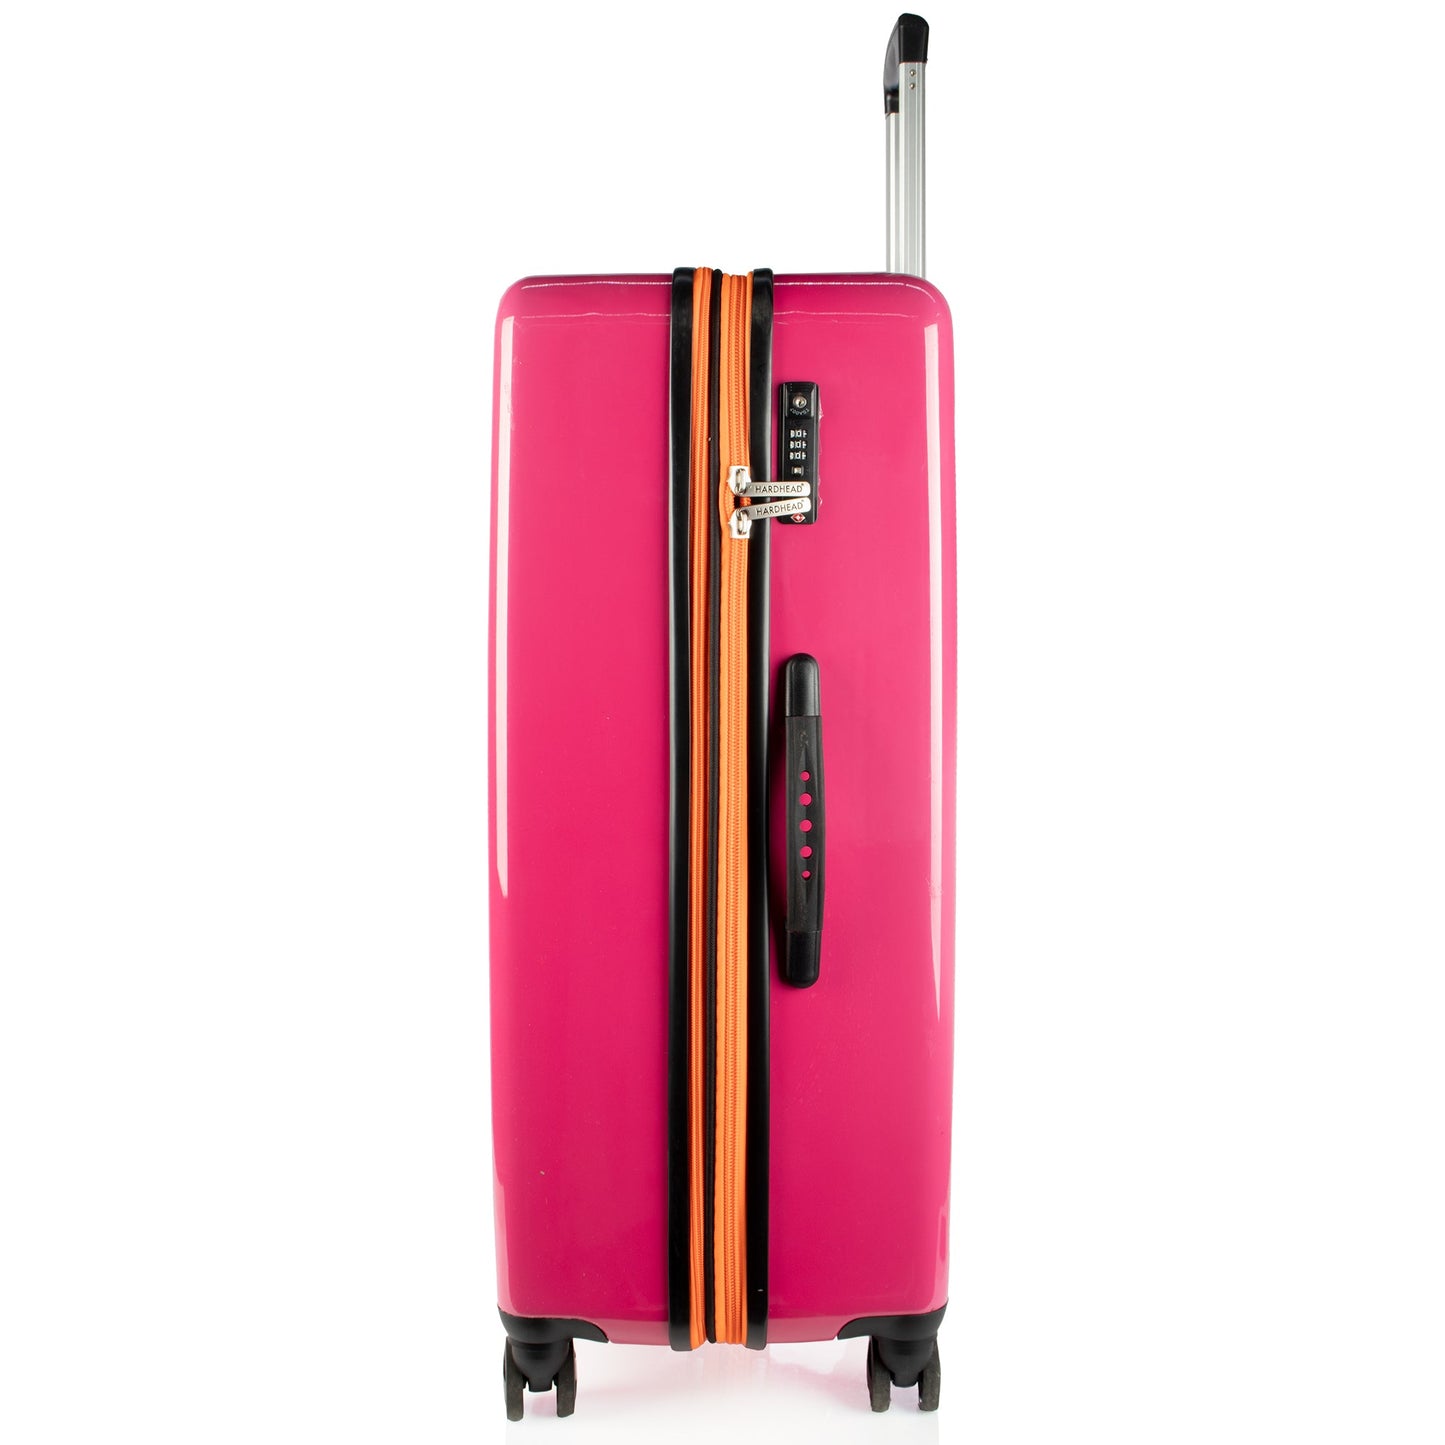 Boost Collection Pink Luggage (22/26/30") Suitcase Lock Spinner Hardshell